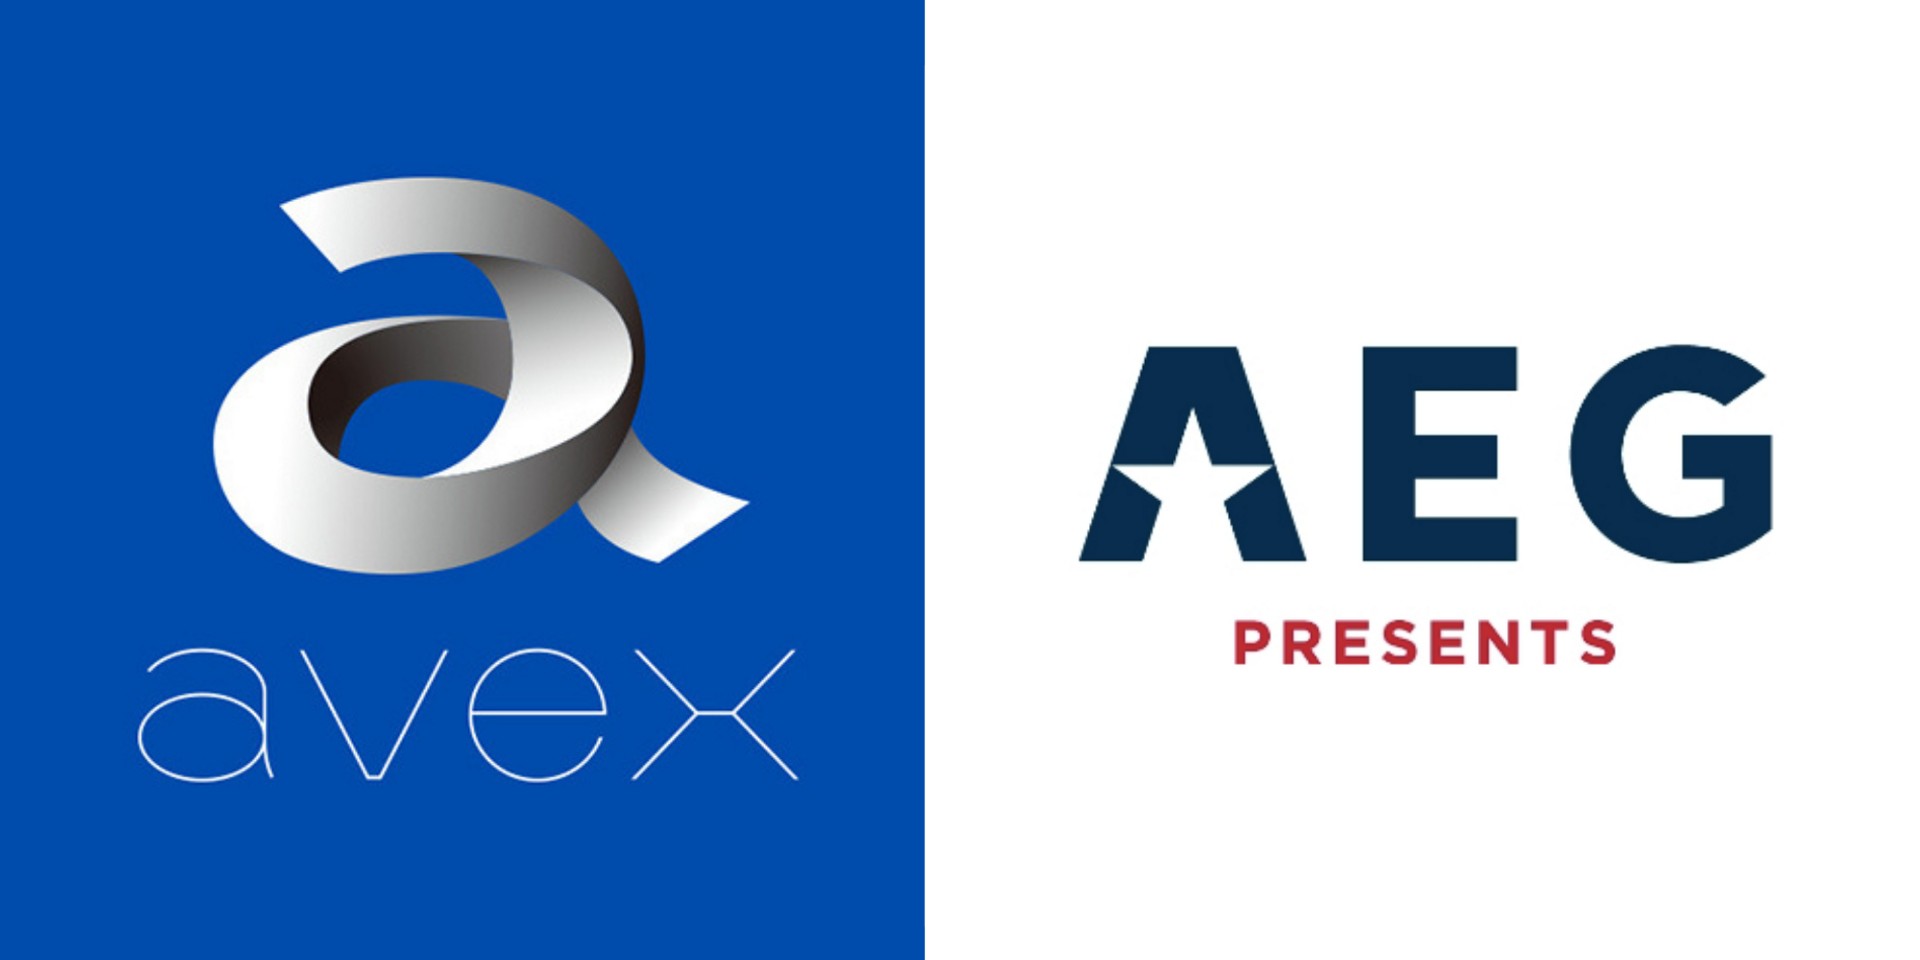 Avex Entertainment partners with concert promoter AEG to bring Japanese music to international fans